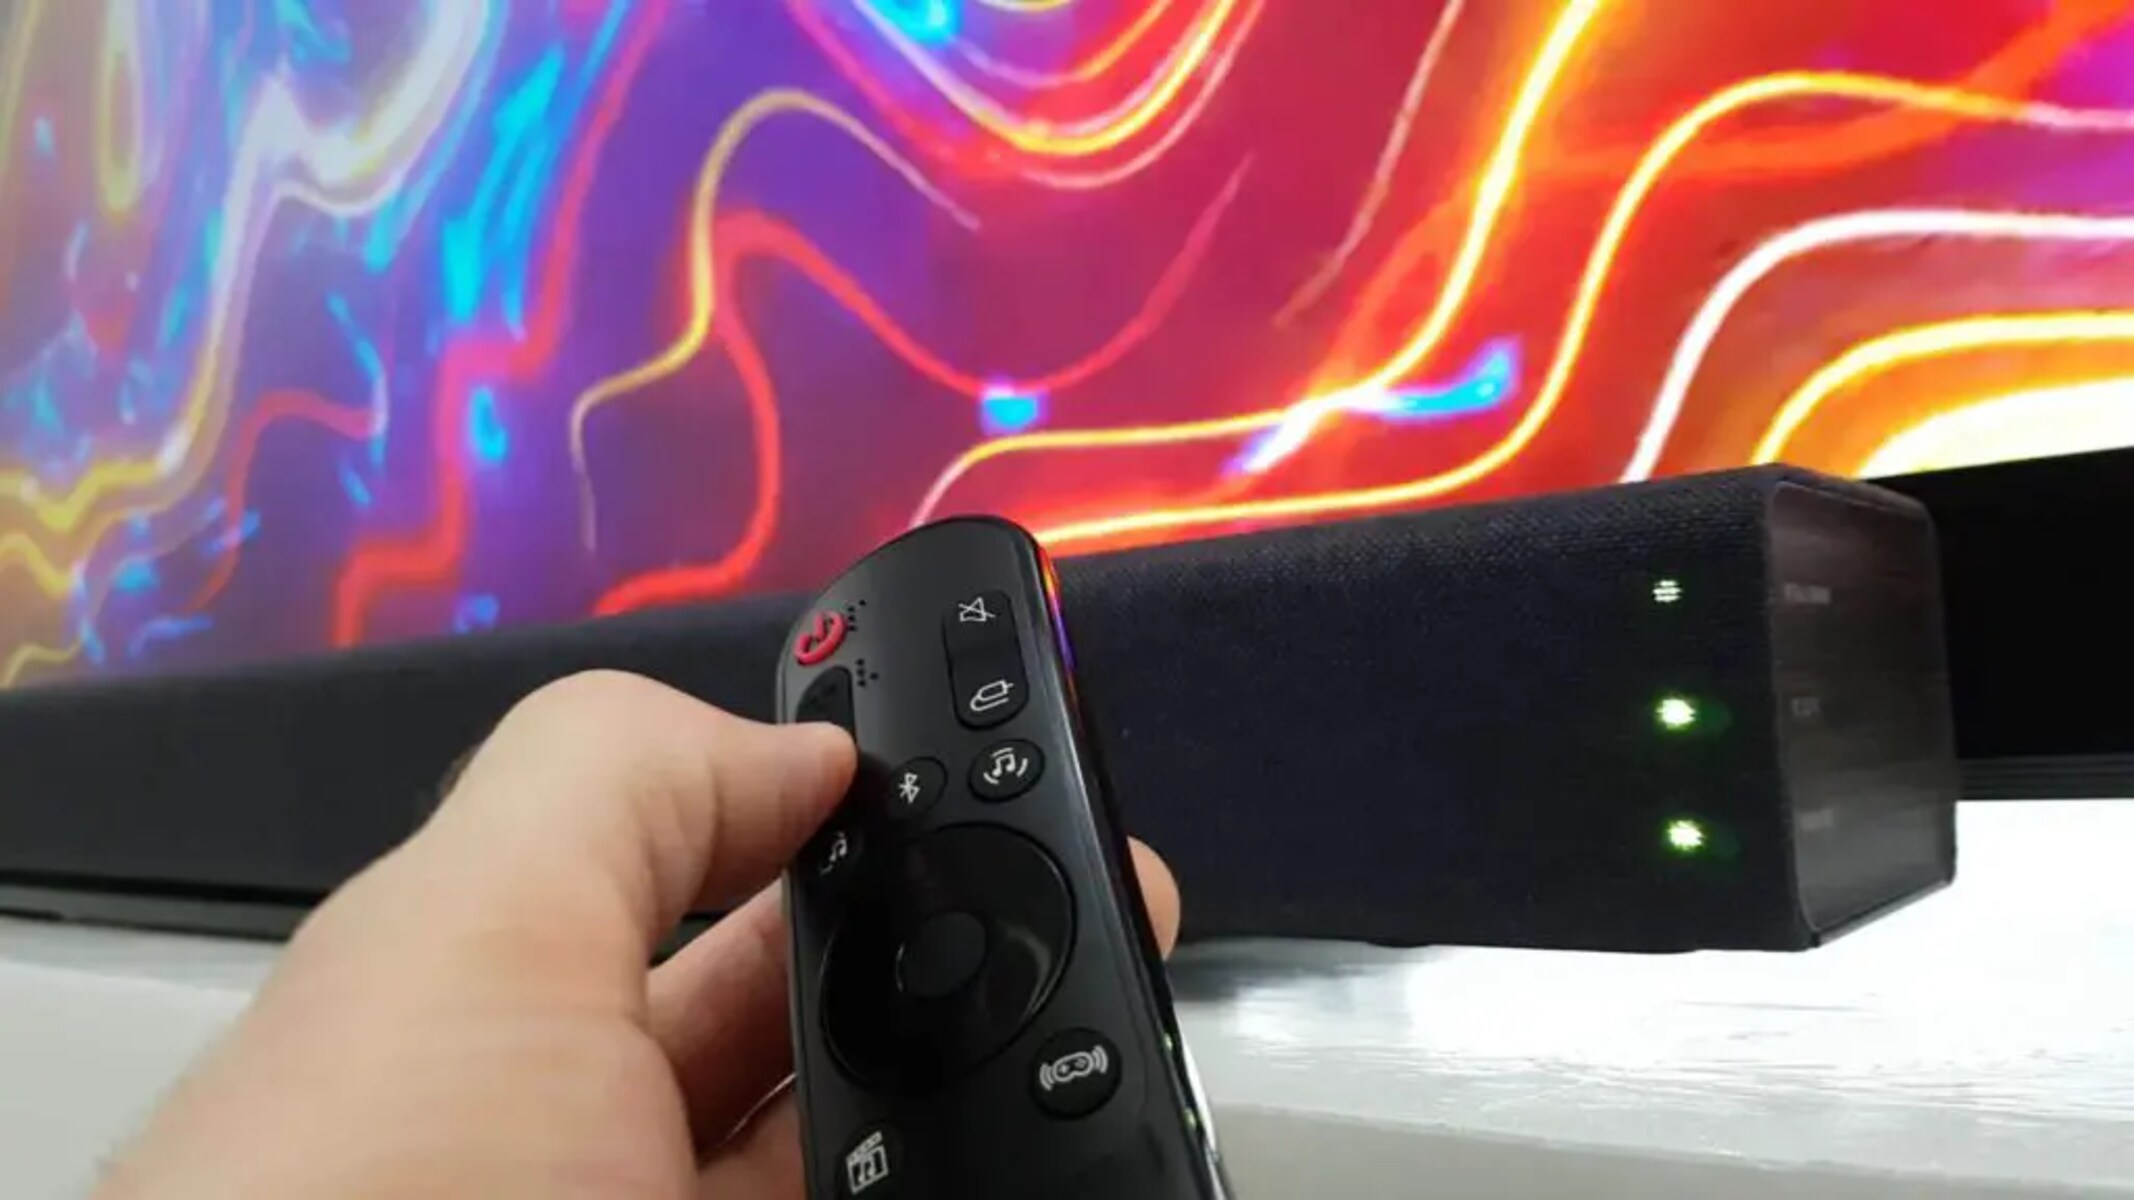 How To Control A Soundbar With An LG TV Remote